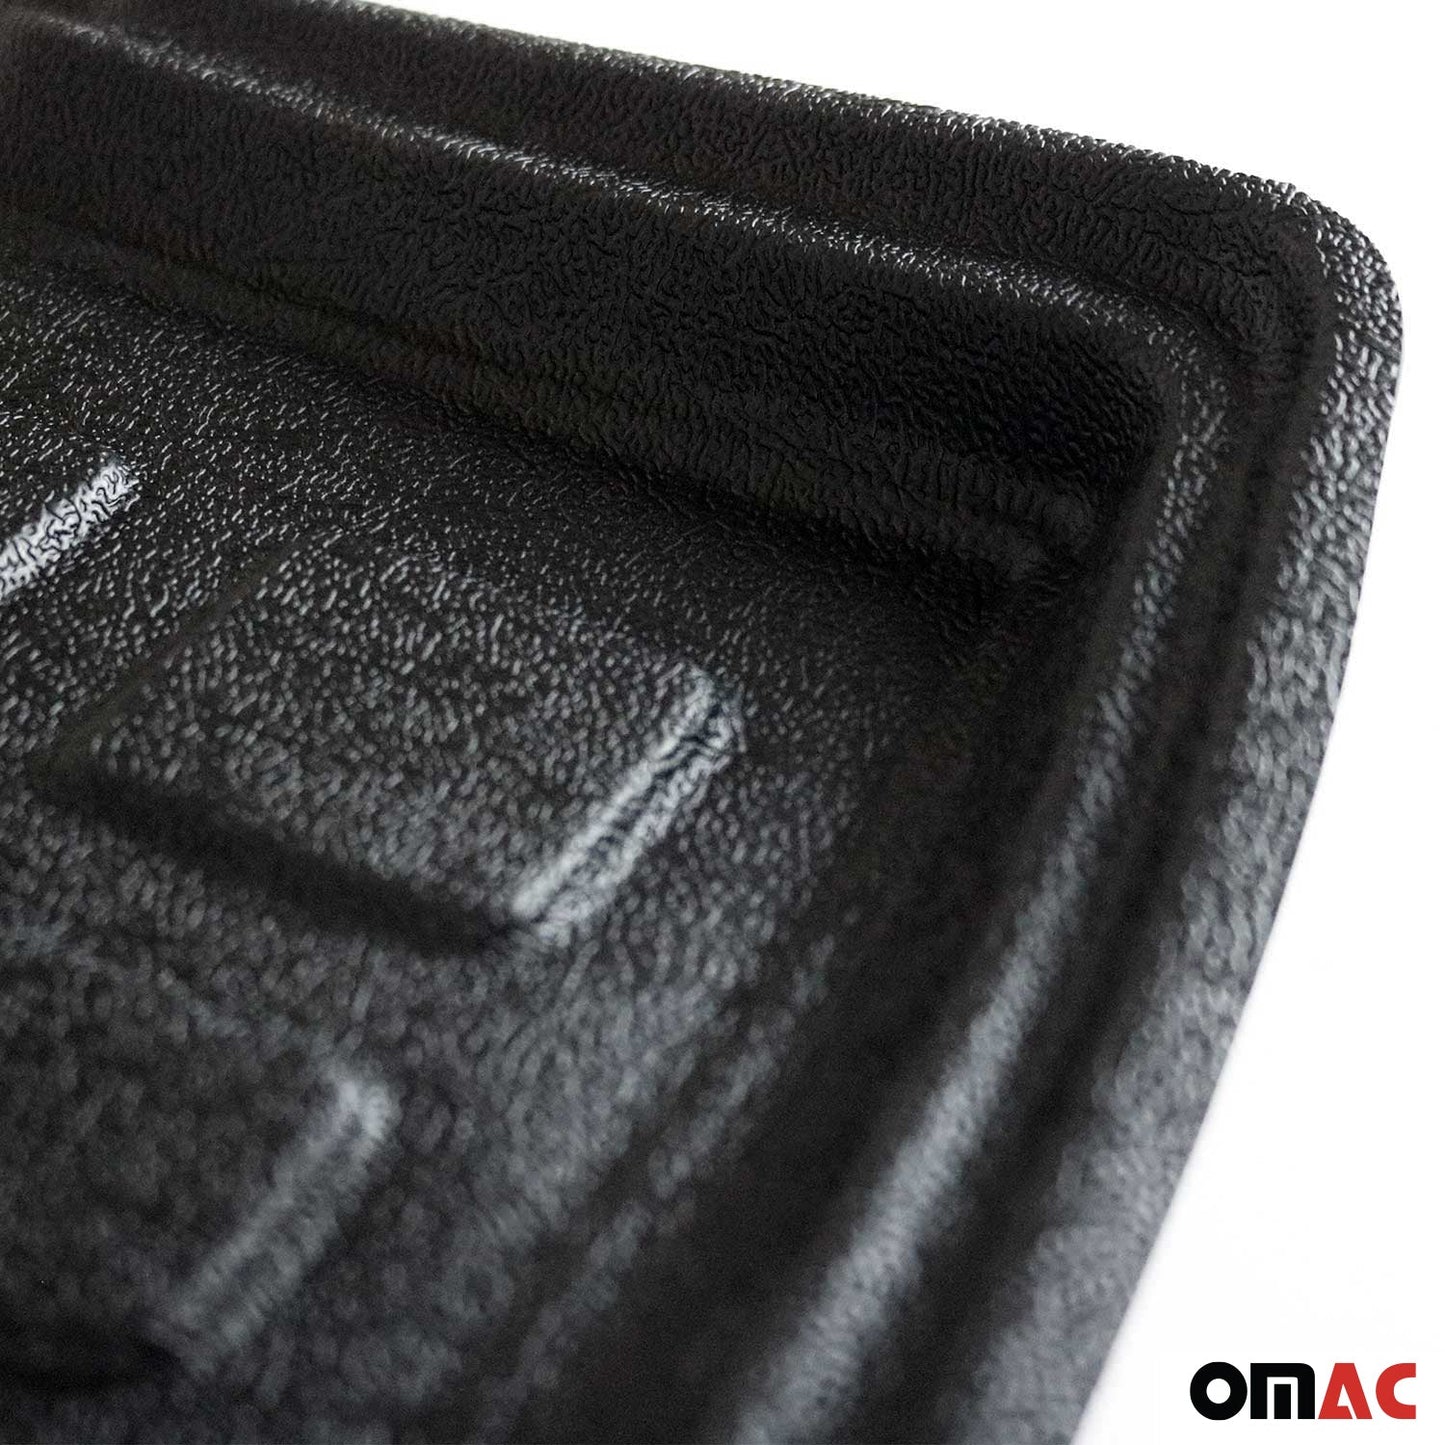 OMAC OMAC Cargo Mats Liner for Mercedes C Class W203 Sedan 2001-2009 All-Weather TPE 4708YPS250